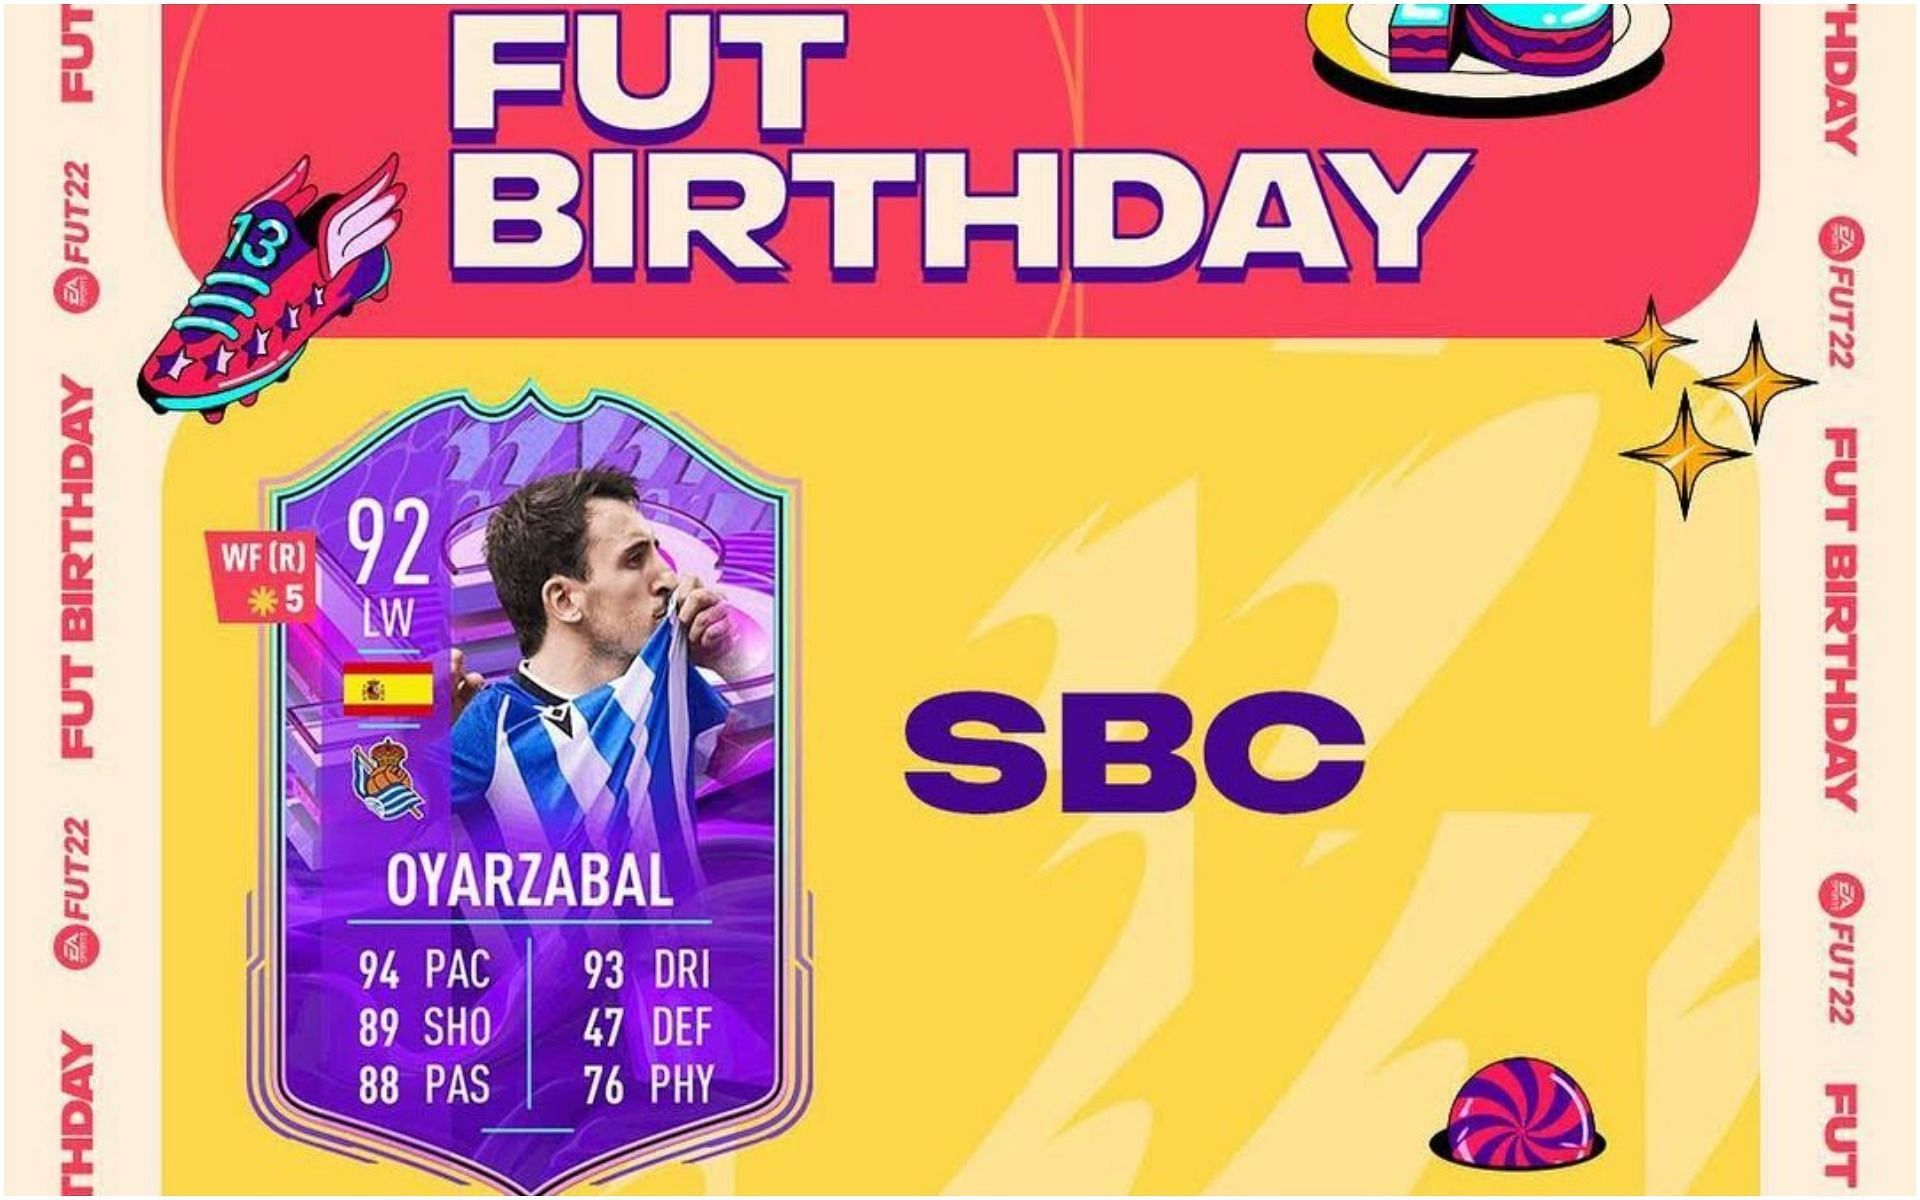 FUT Birthday Mikel Oyarzabal SBC is now live in FIFA 22 Ultimate Team (Image via EA Sports)